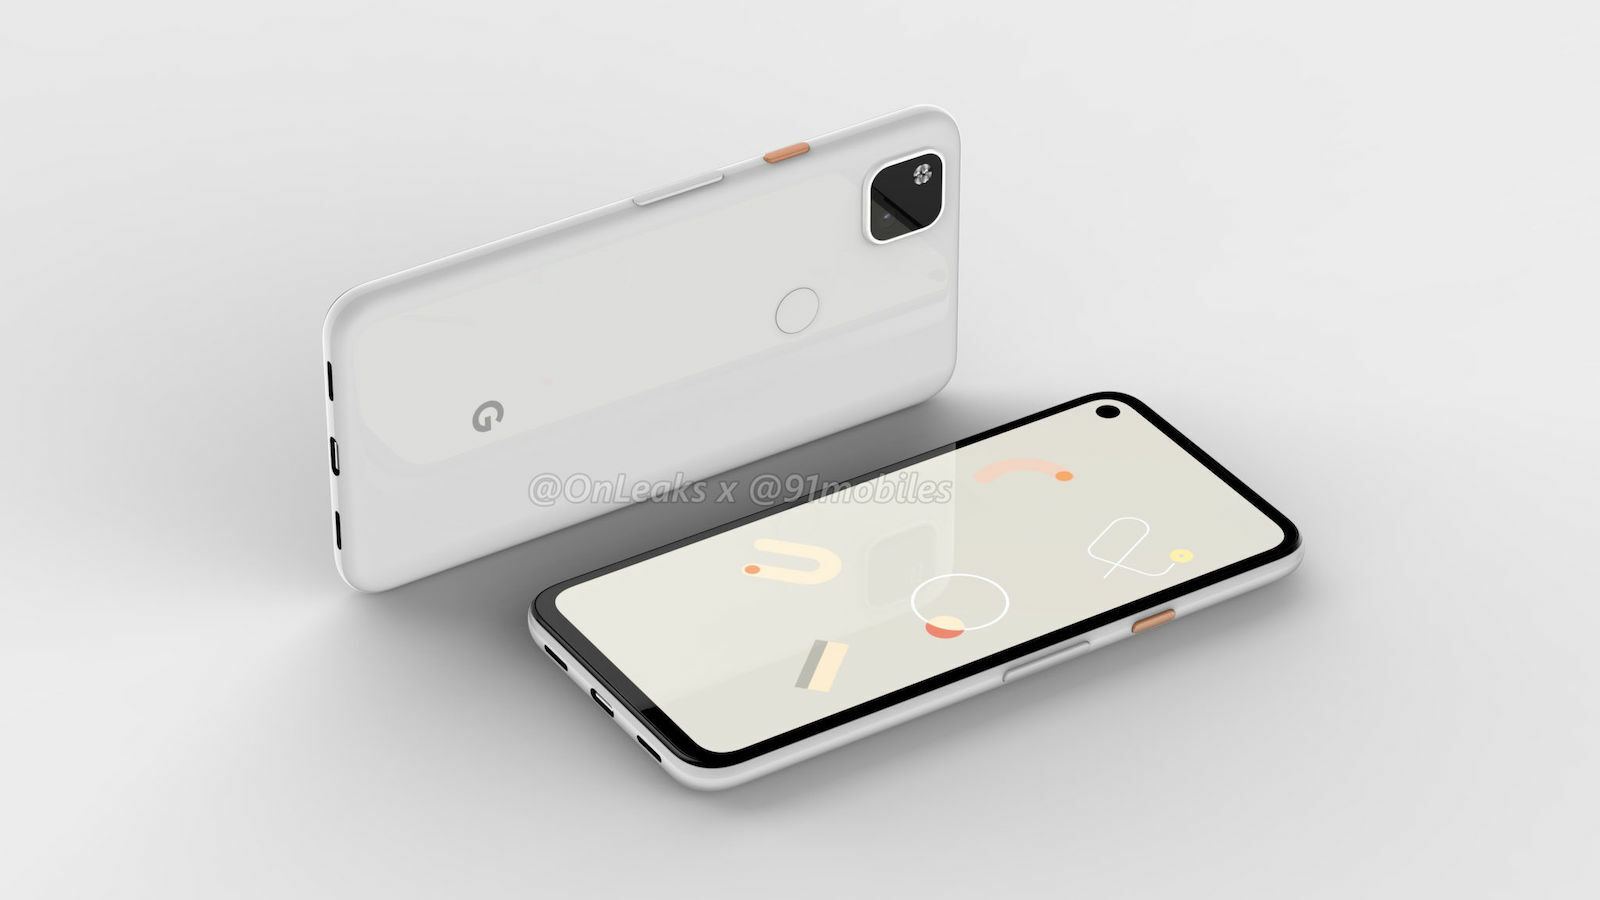 Is there anything else I should know about the Google Pixel 4a?